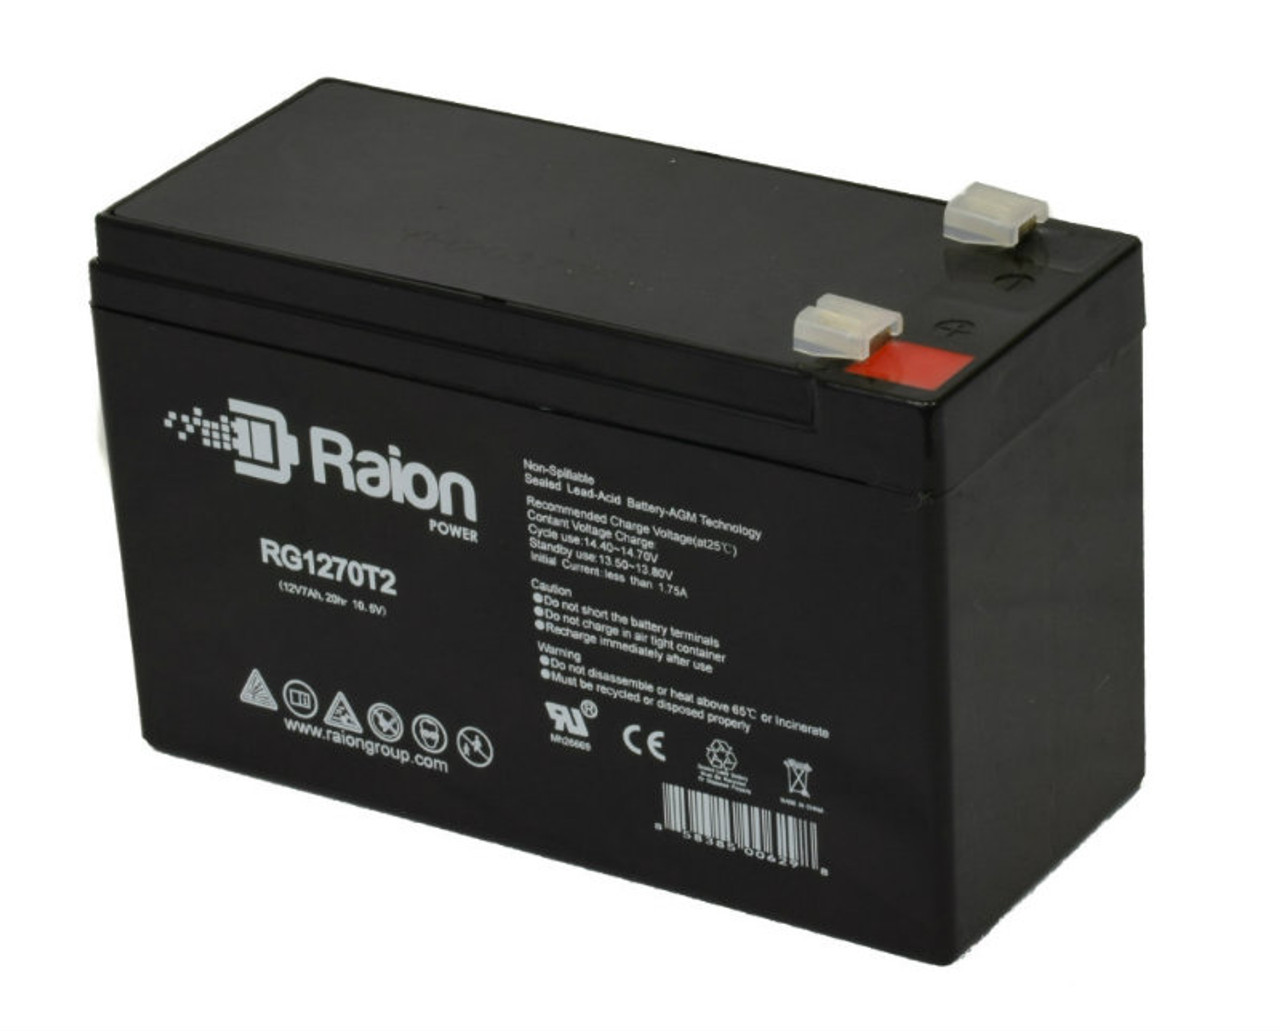 Raion Power RG1270T2 12V 7Ah Rechargeable Battery for Helios FB12-7-F2